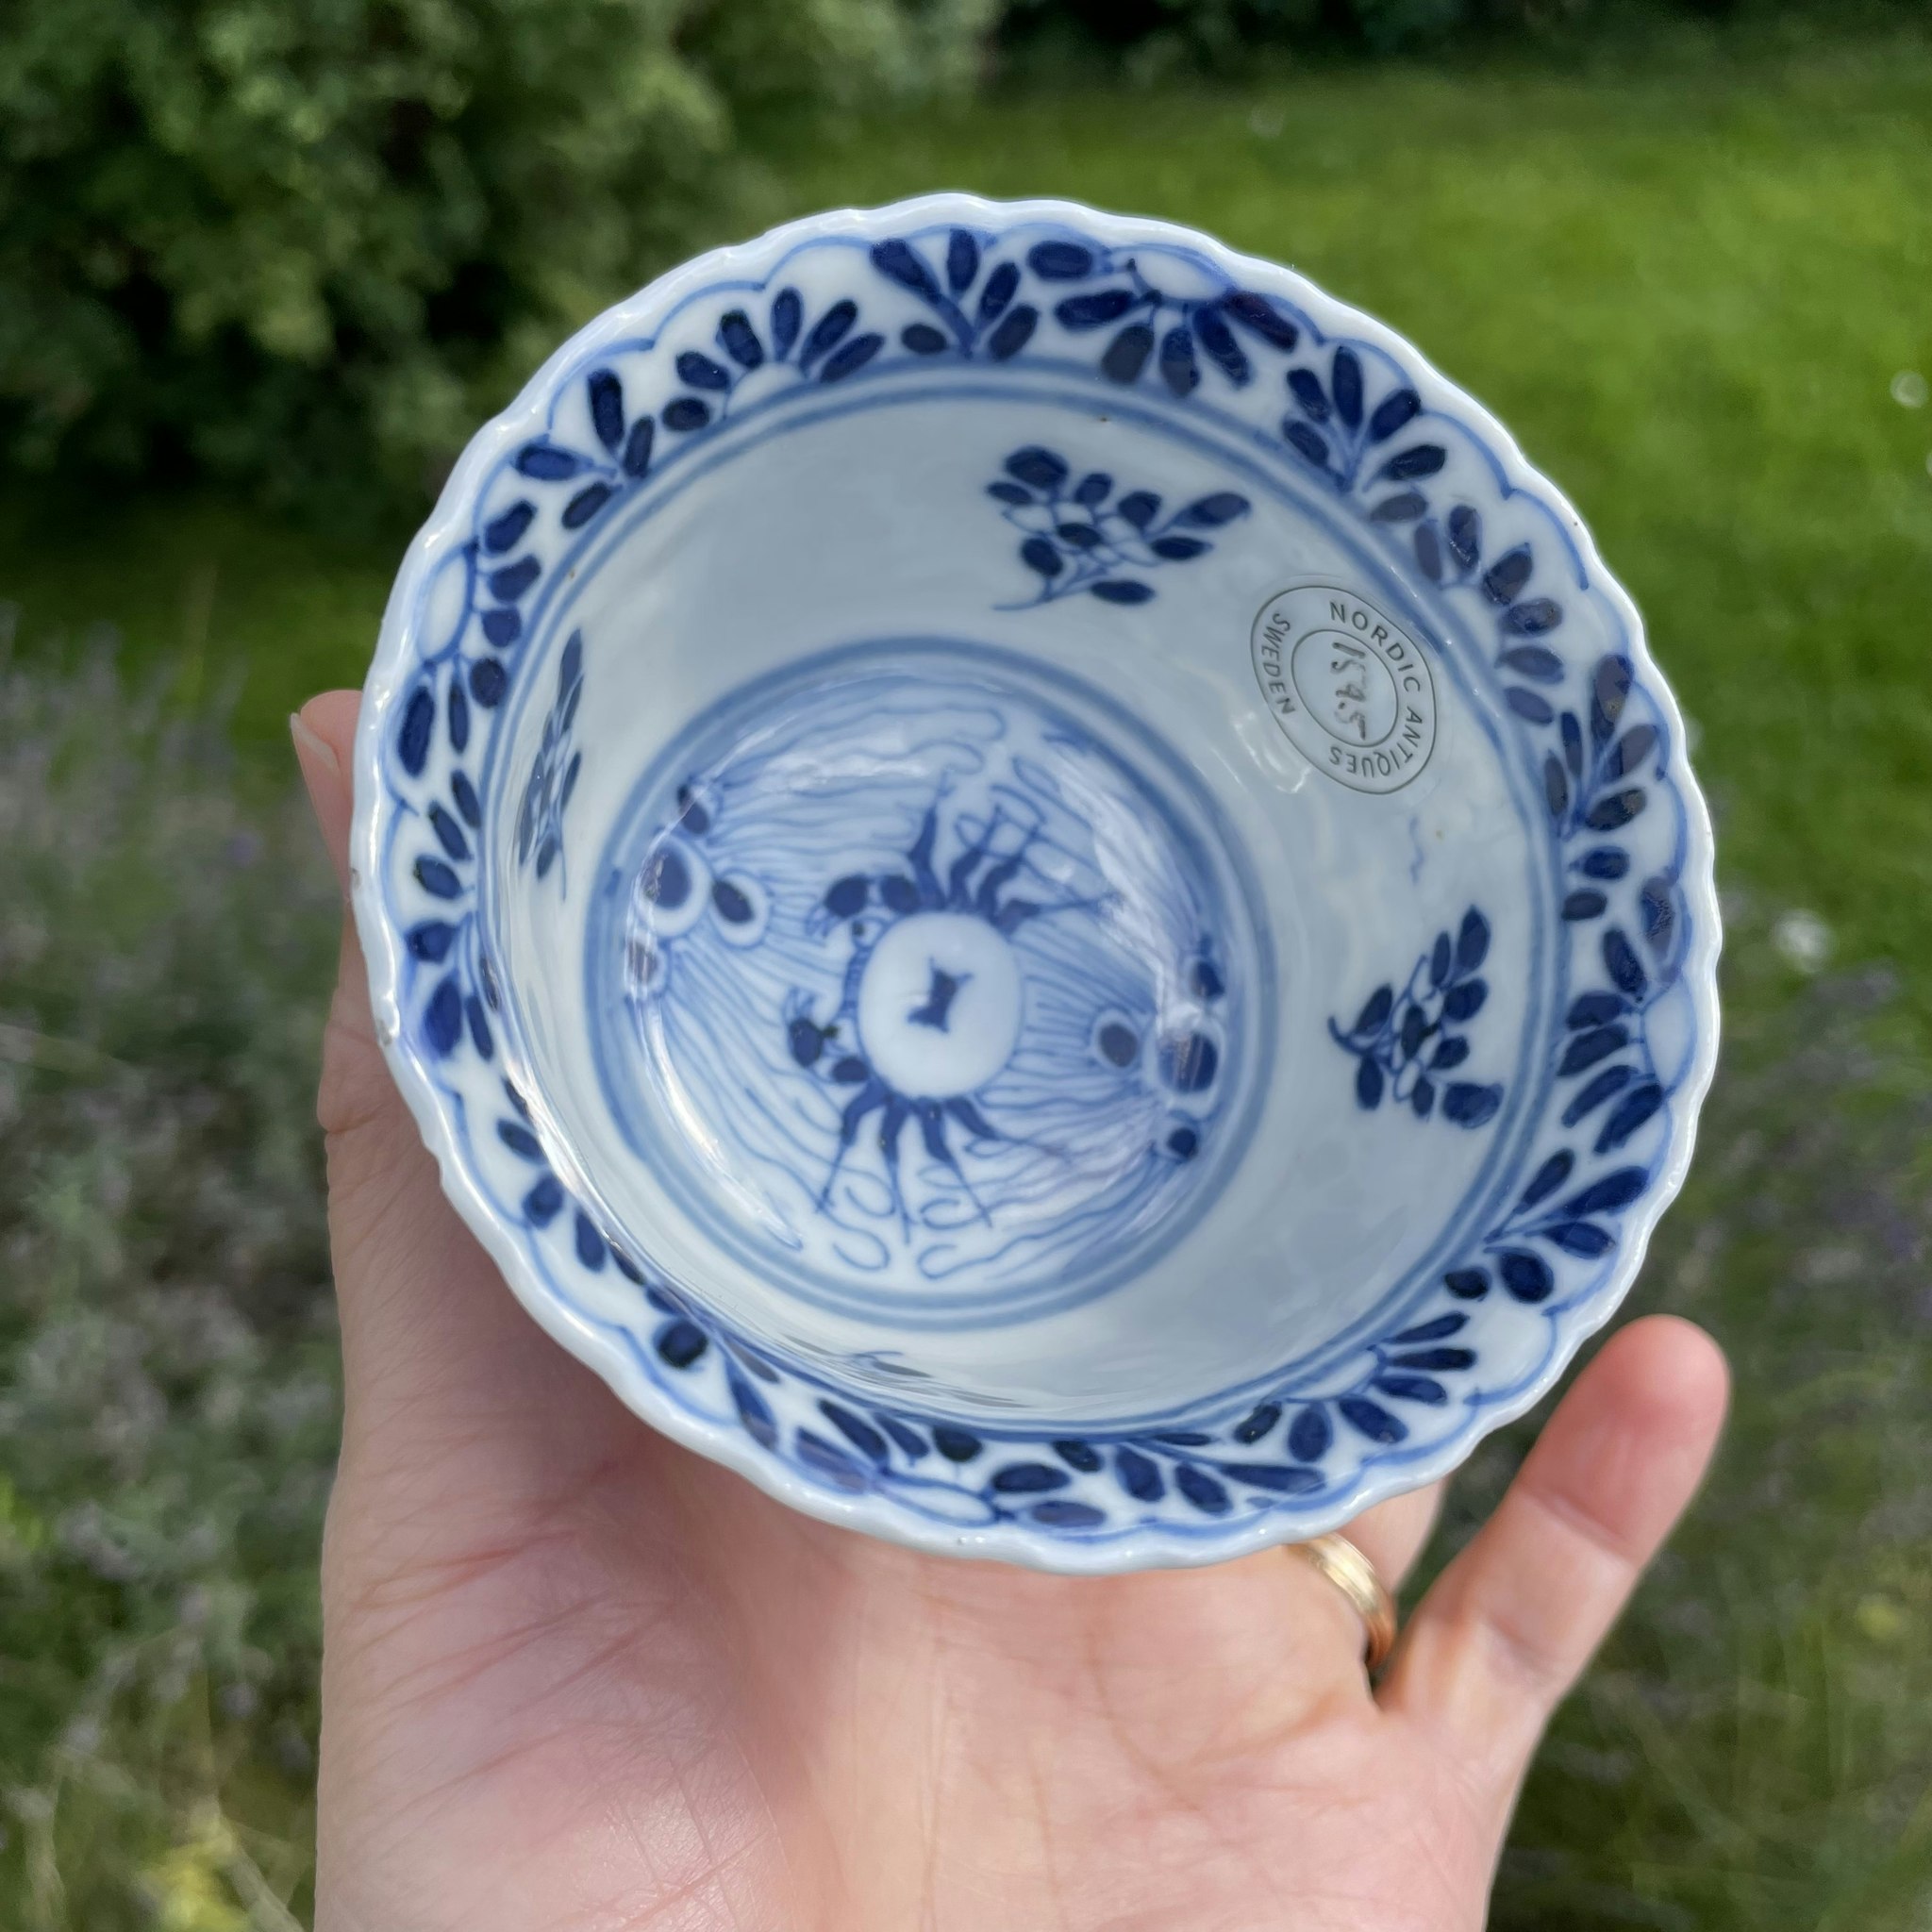 Chinese antique teacup and saucer decorated in underglazed blue with fishes and crabs, Kangxi Revival #1595